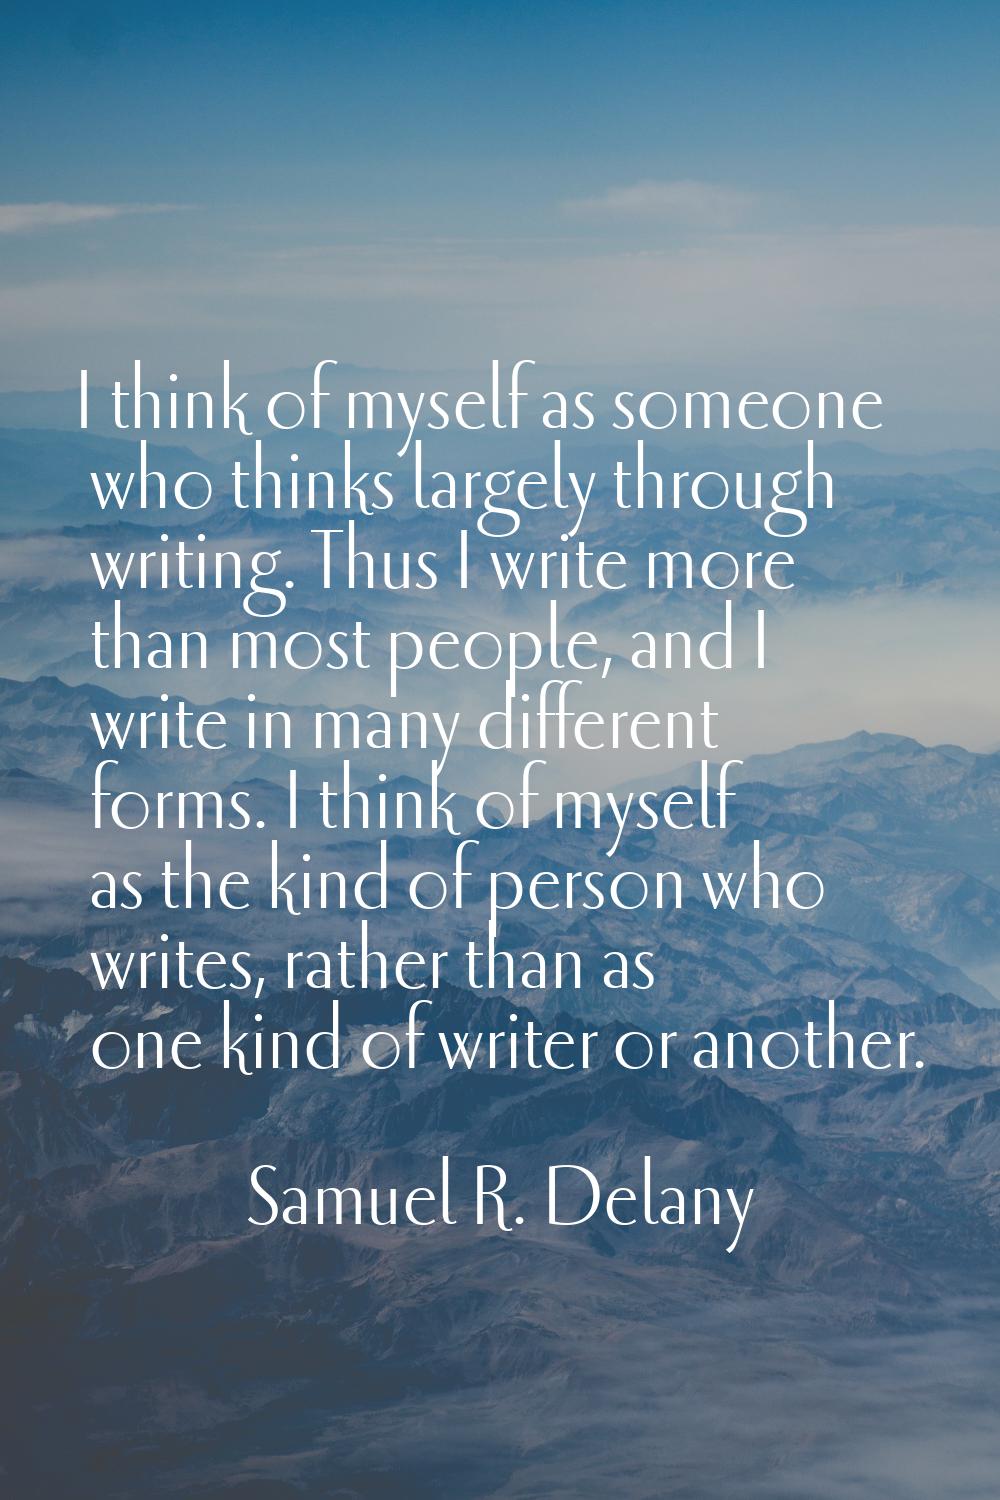 I think of myself as someone who thinks largely through writing. Thus I write more than most people